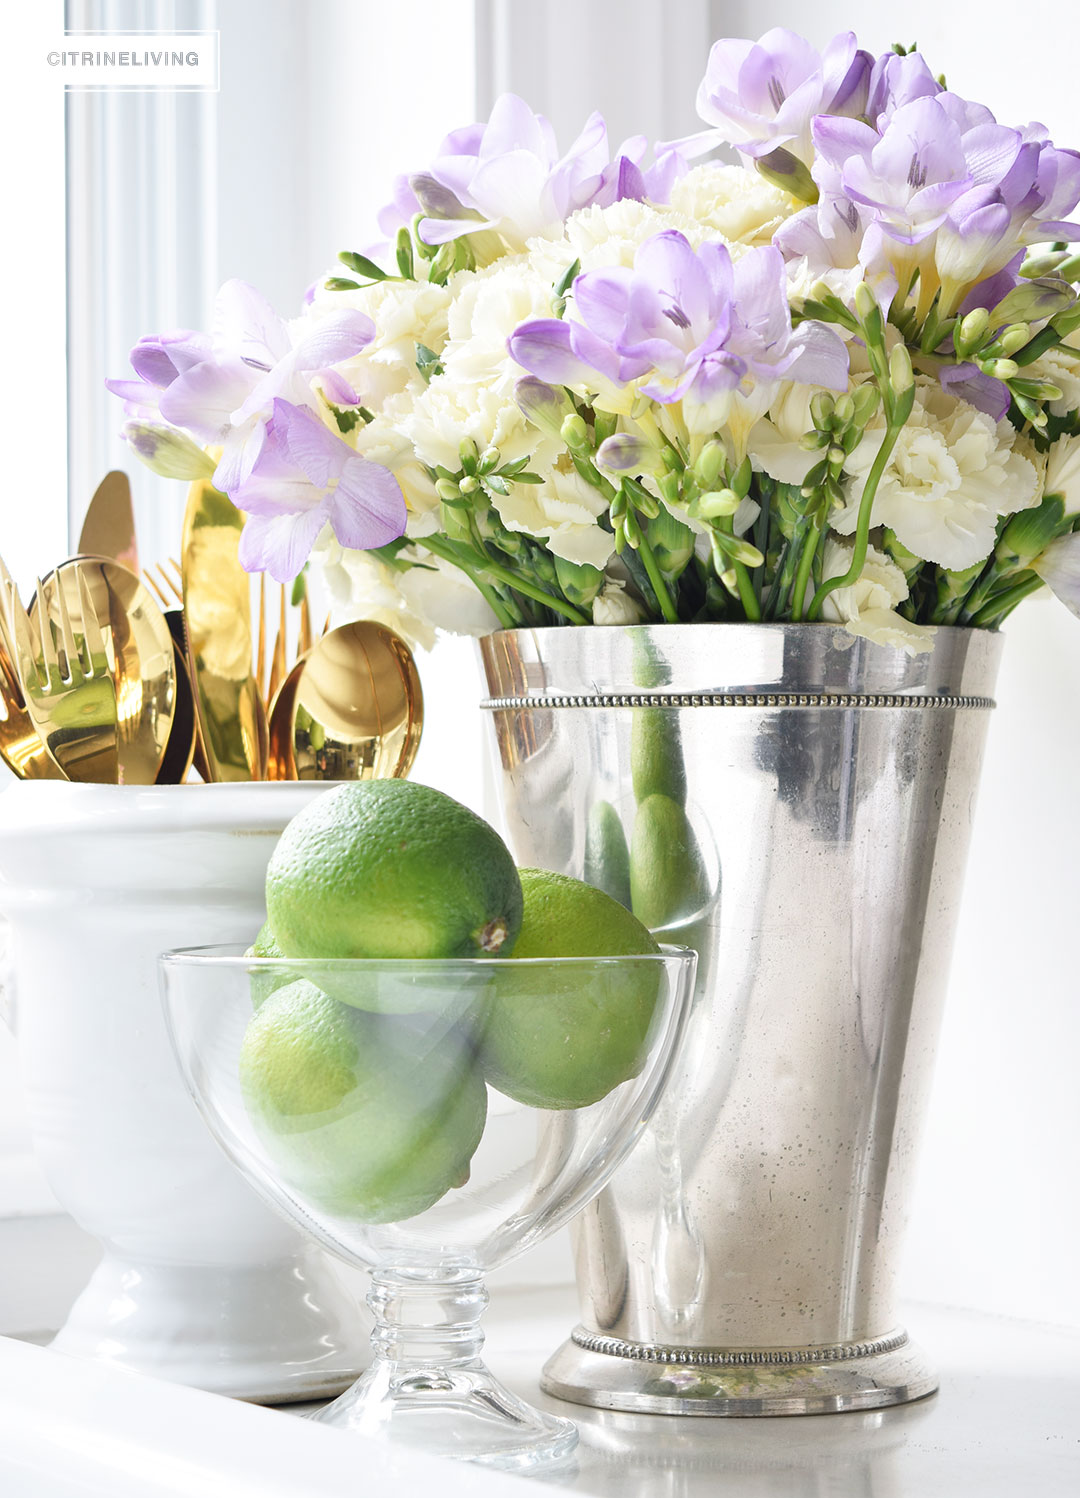 Beautiful Spring flowers - hydrangeas and freesias - paired with fresh limes, creates a vibrant vignette on the in your kitchen.